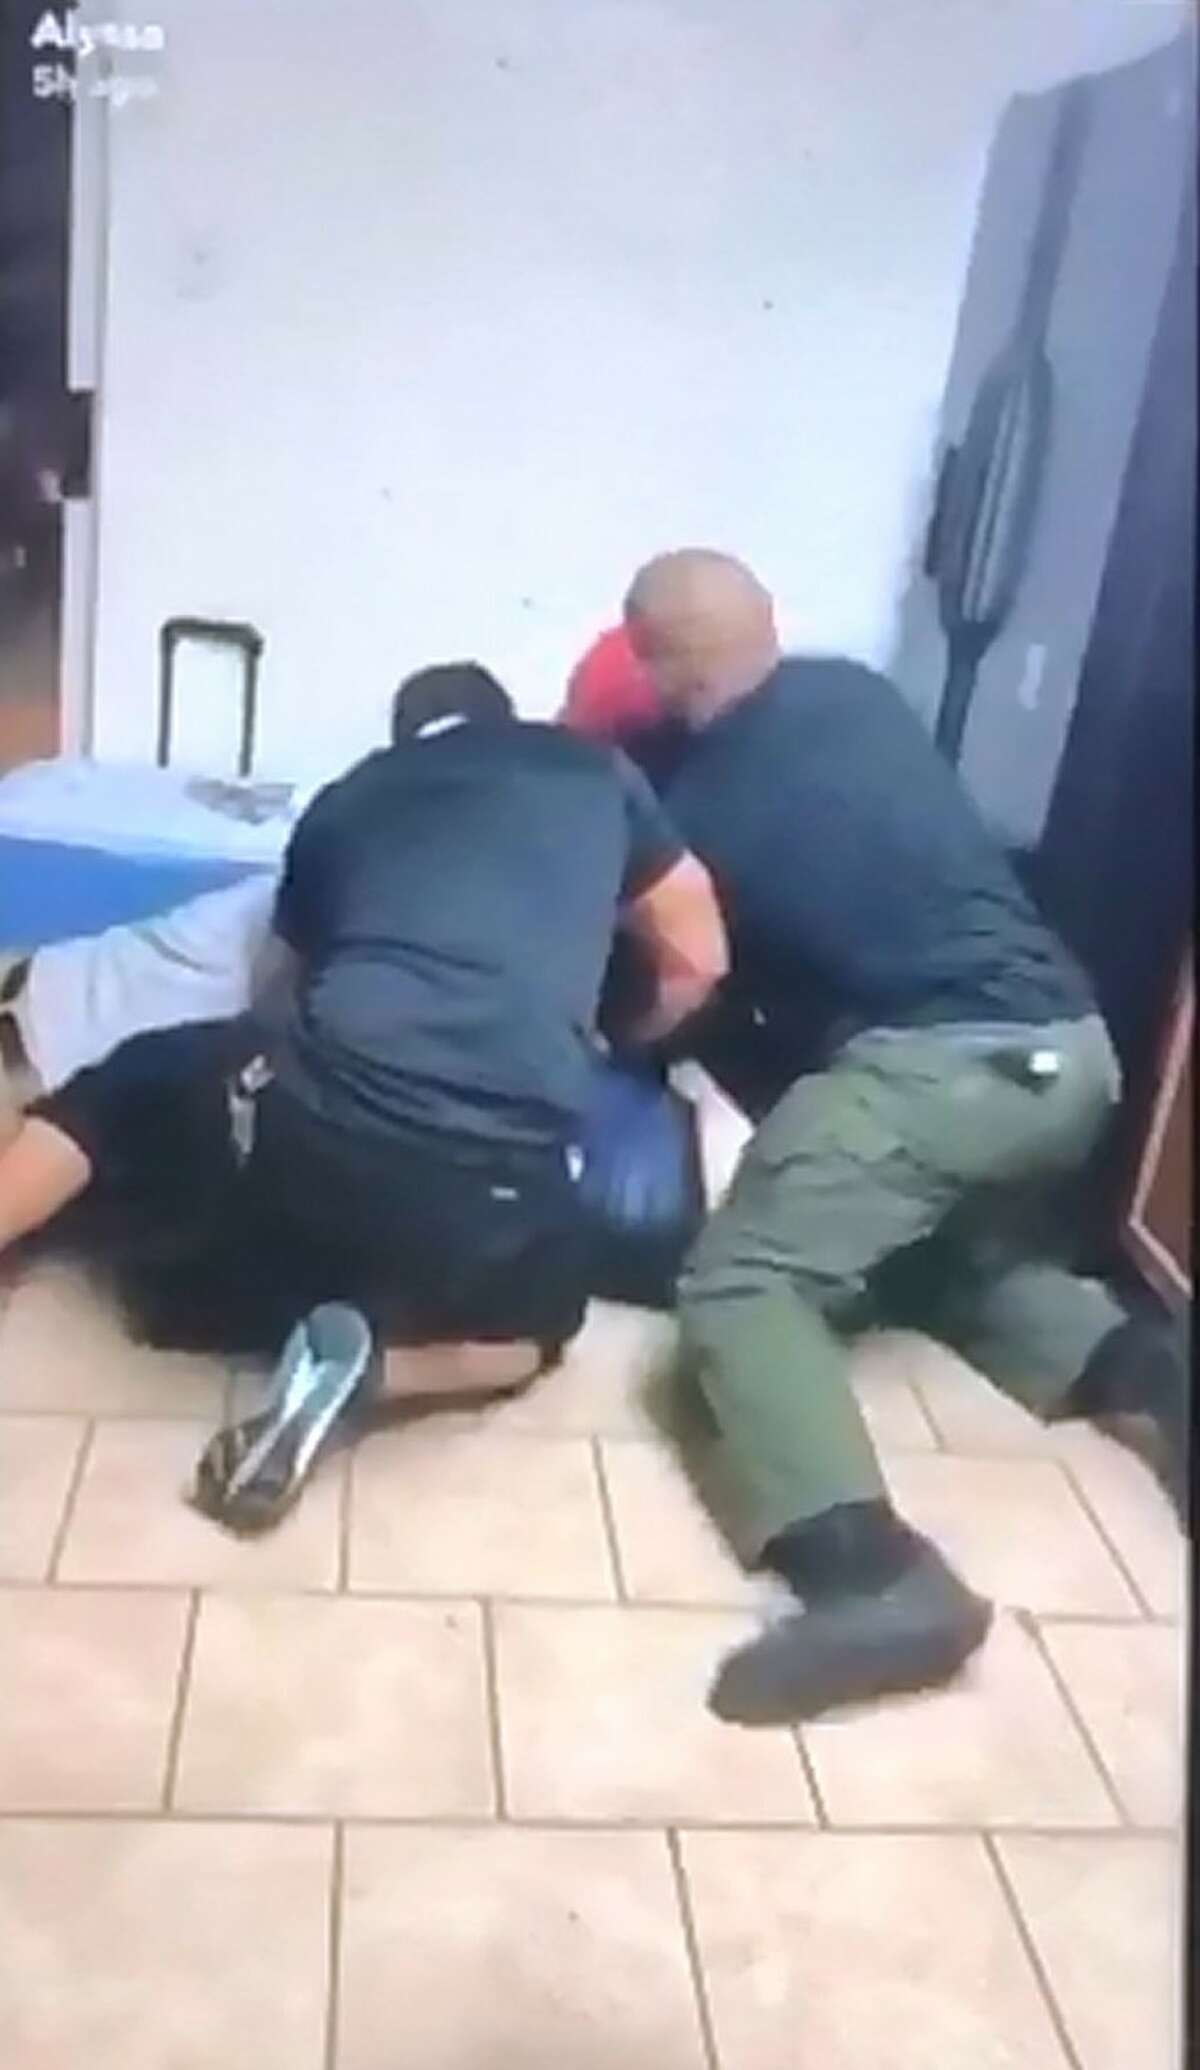 The Bexar County Sheriff's Office released video from a 2017 hazing incident involving 7 SERT officers.